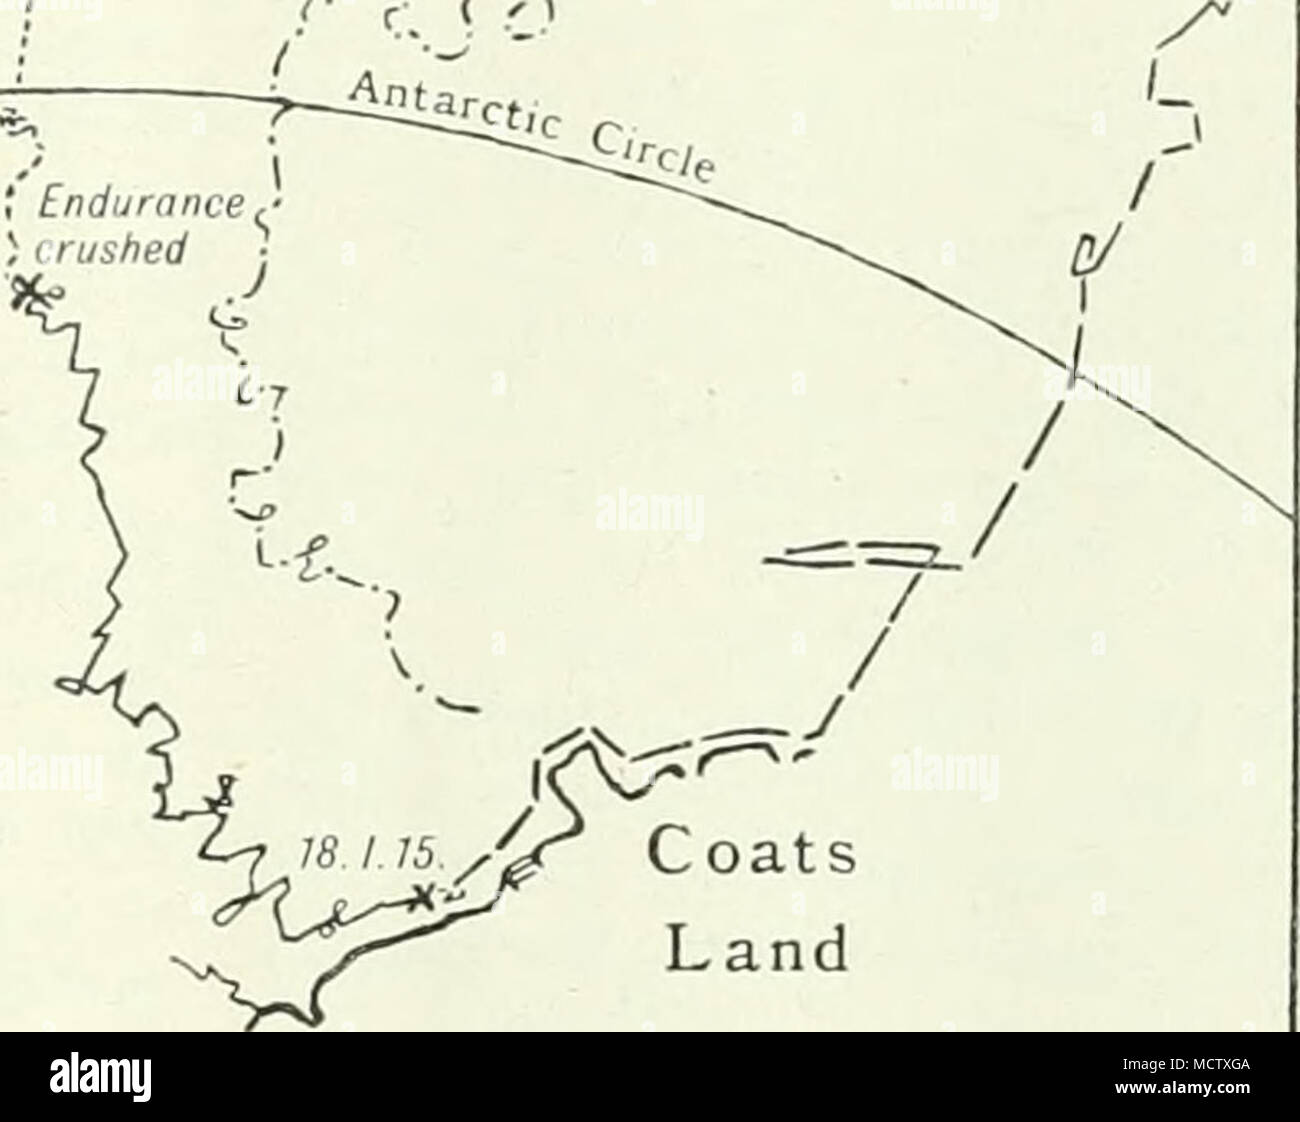 . Coats Land Fig. 3.âMP of THE.WKDDELI, SFA ILLUSTRATING THE DRIFTS OF THE ENDURANCE AND THE DEUTSCHLAXD. the winds had been light and variable, hardly a mile had been made to the north. The wind is doubtless the most important cause of the drift, but a more complete examination of the observations than has hitherto been possible will almost certainly bring to light an outstanding effect due to current. The direction of the drift was always a little to the left of the direction of the wind. This is due to the rota- tion of the earth, and a similar deviation to the right of the wind direction  Stock Photo